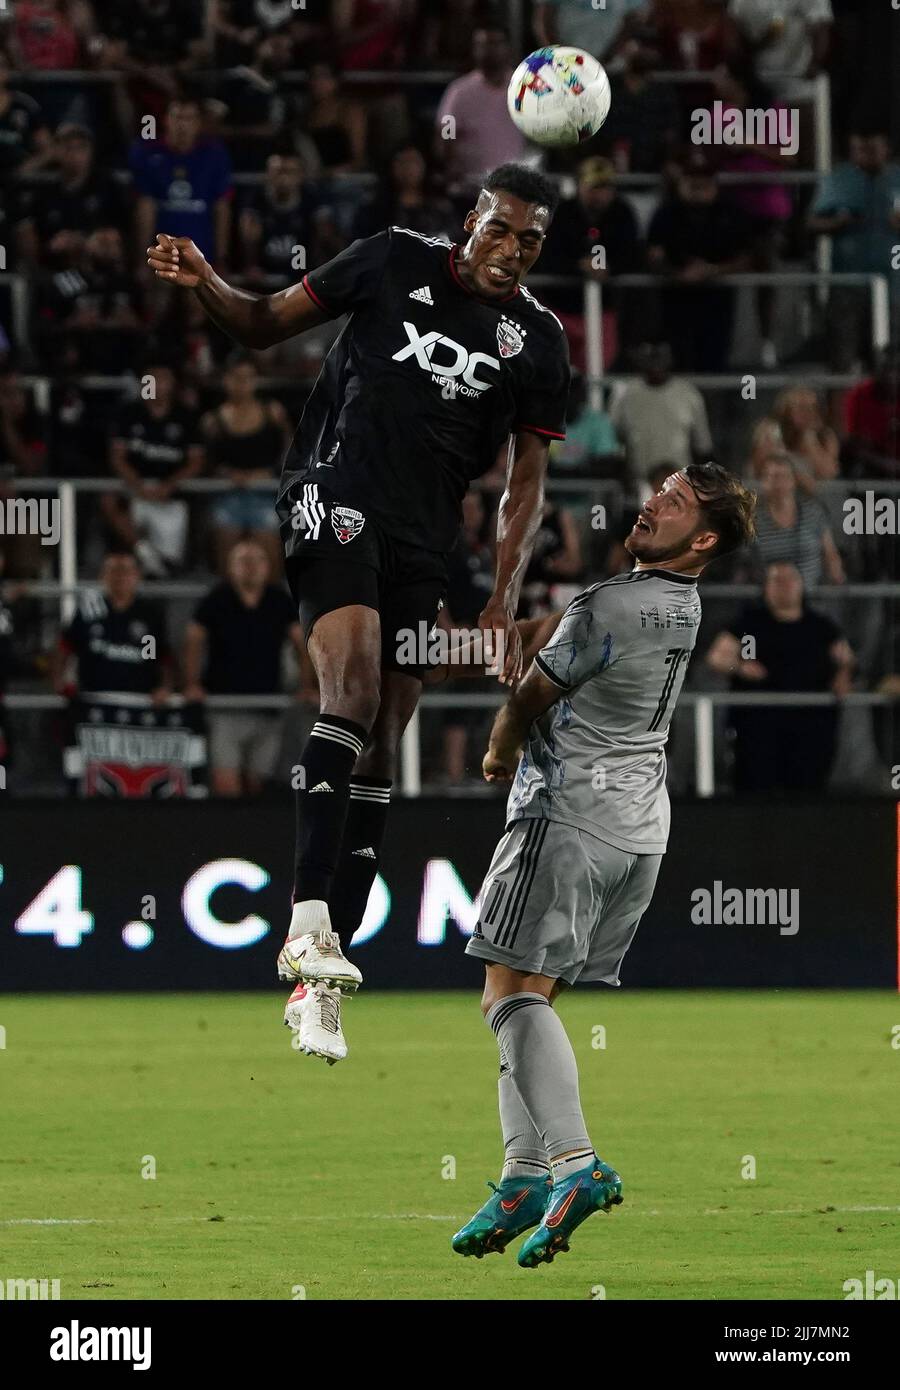 WASHINGTON, DC, USA - 23 JULY 2022: D.C. United defender Donovan Pines (23) heads over CF Montréal midfielder Matko Miljevic (11) during a MLS match between D.C United and C.F. Montreal, on July 23, 2022, at Audi Field, in Washington, DC. (Photo by Tony Quinn-Alamy Live News) Stock Photo